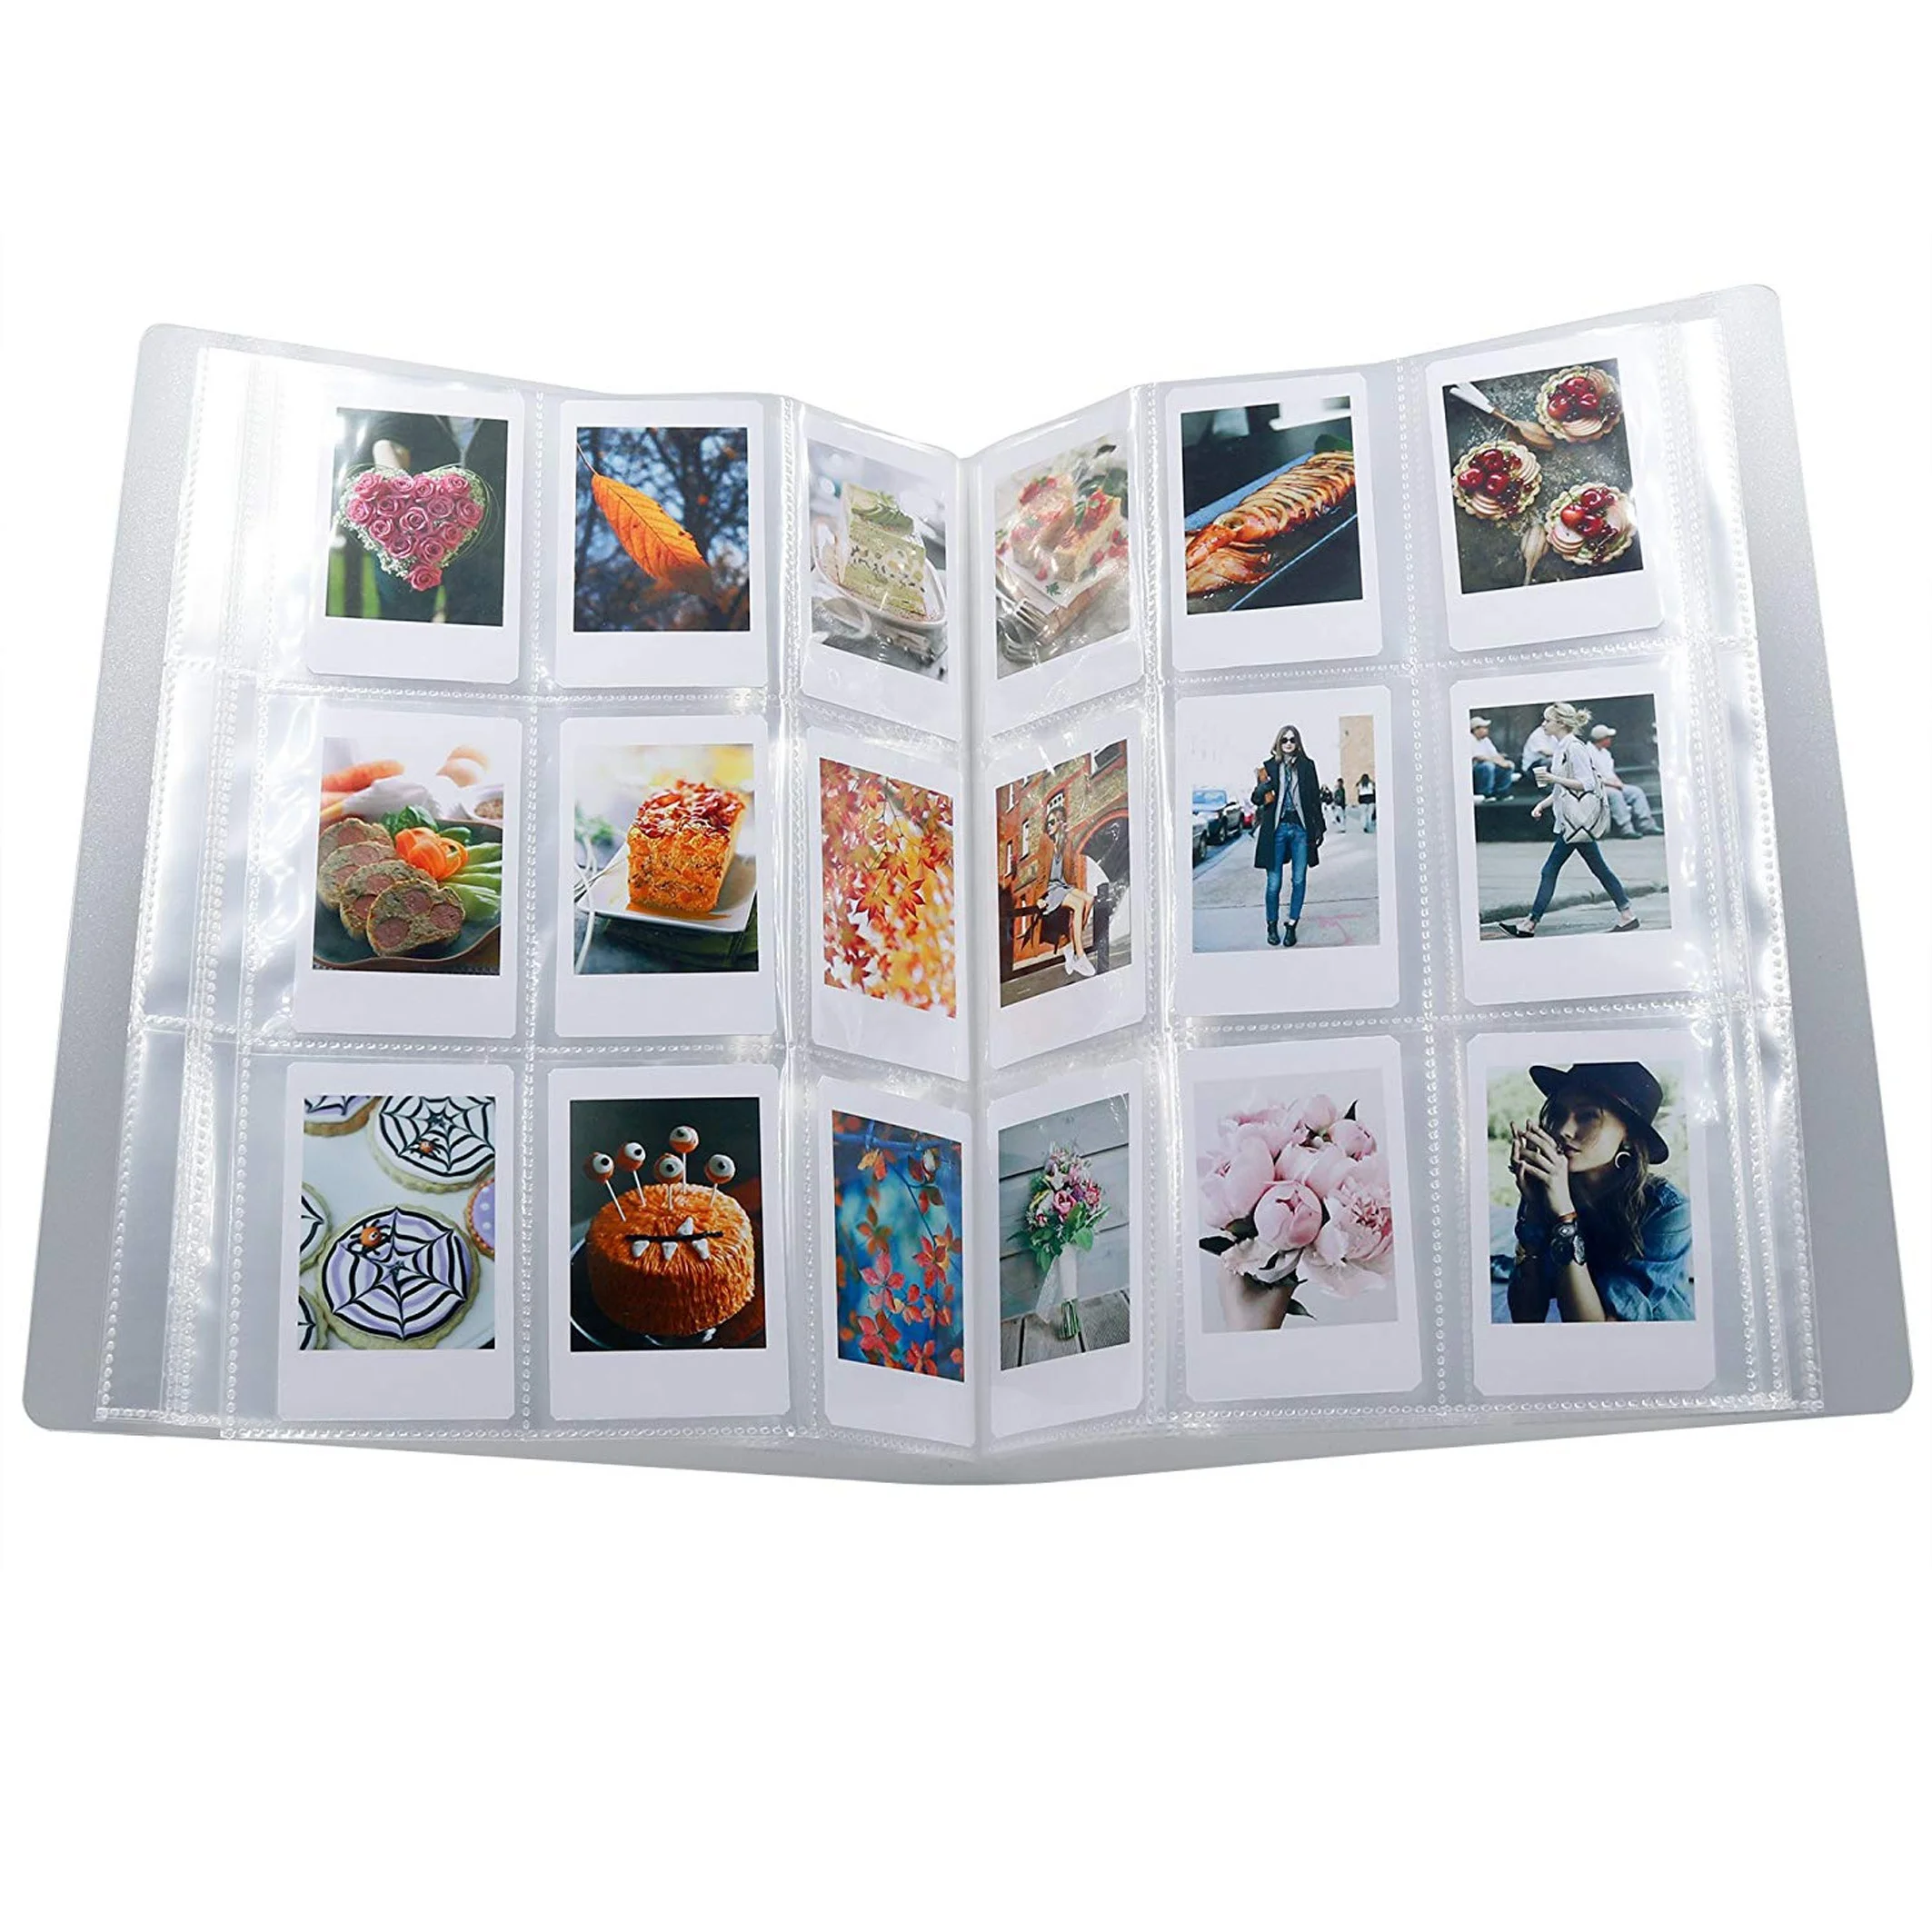 288 Pockets 3-Inch Pack of 9 Instax Mini Clear Transparent Photo Album for Fujifilm, Business Card,Ticket Holder